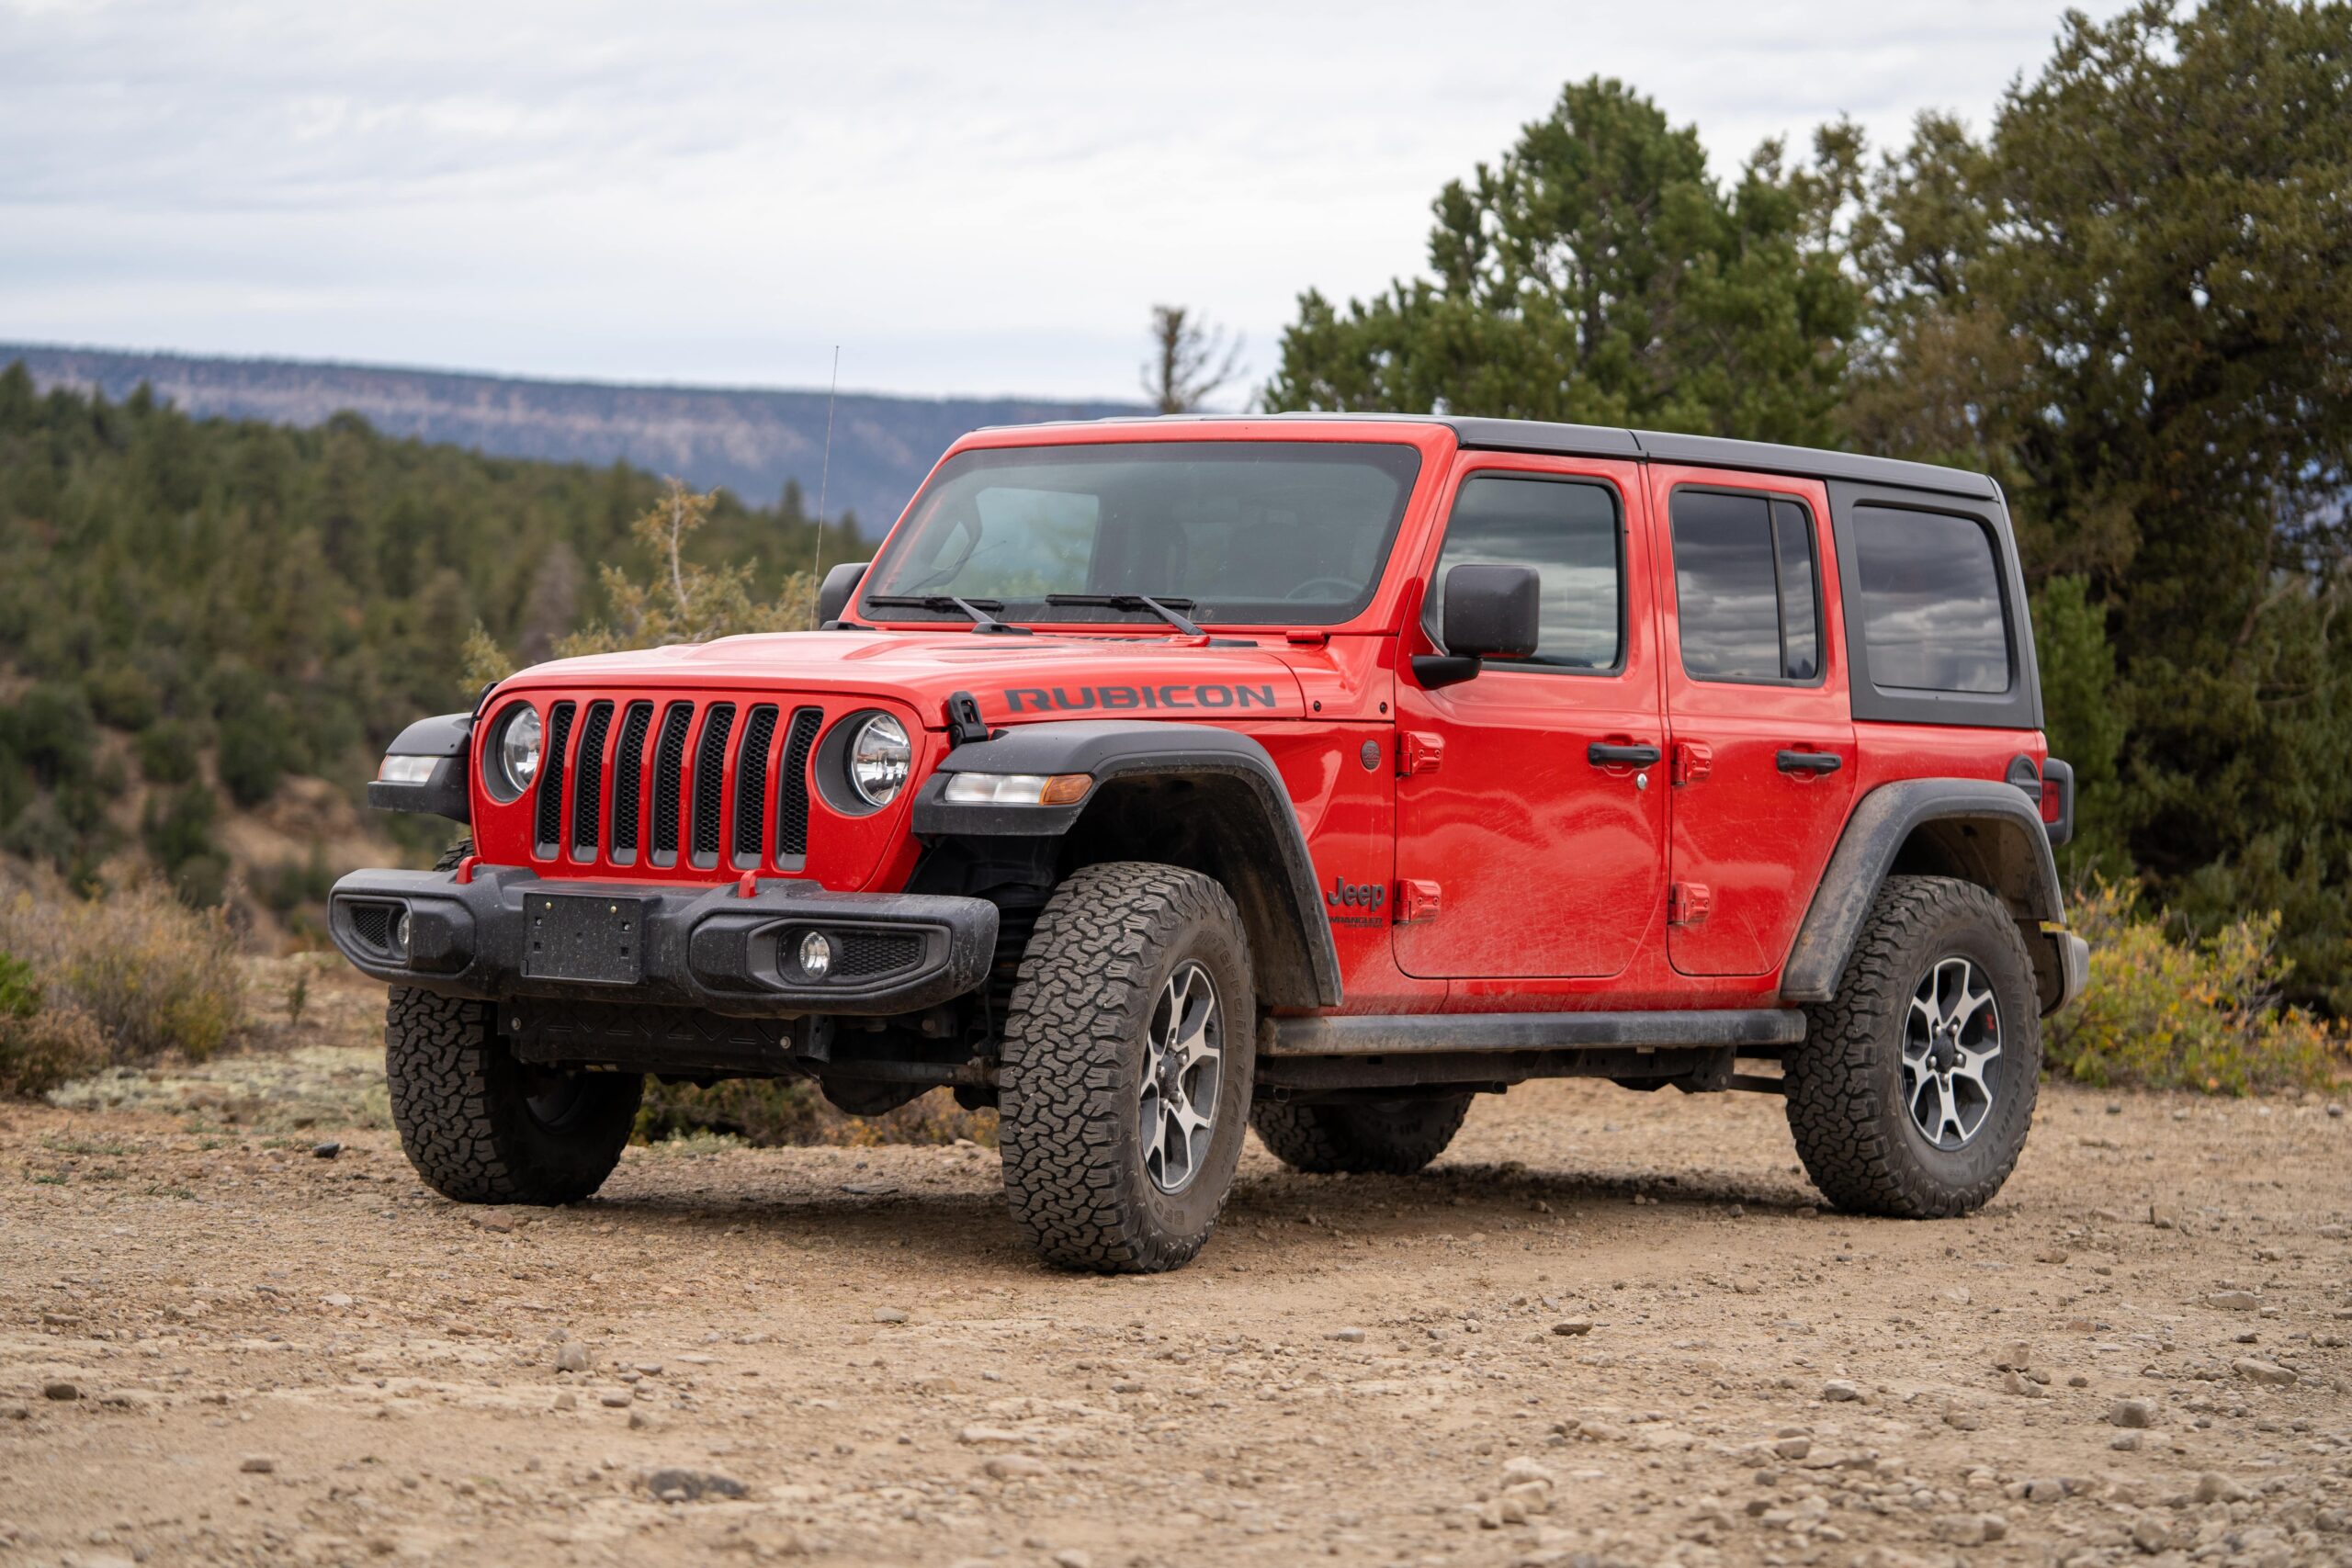 How to Increase Your Jeep’s Storage Capacity?